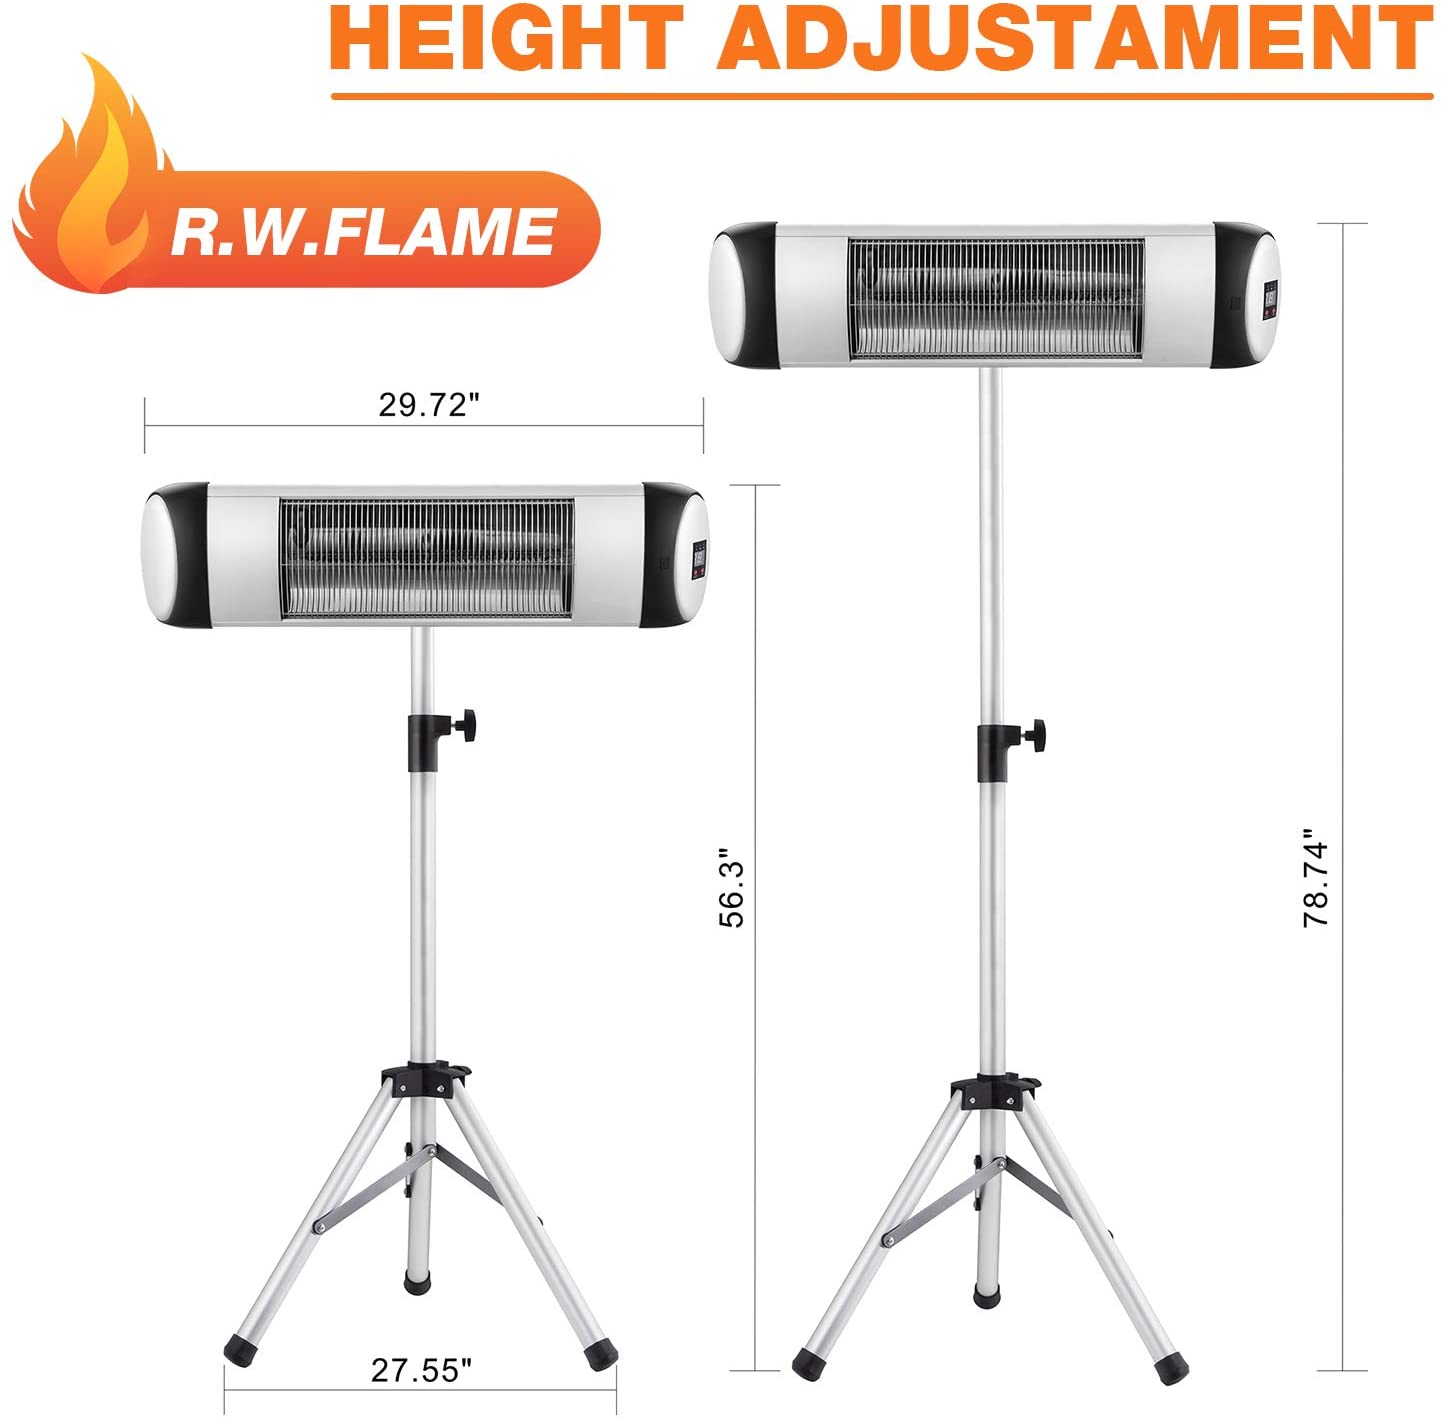 RW FLAME, RW Flame 516B 500W-1500W Height Adjustable Waterproof IP65 Rated Infrared Electric Patio Heater With Remote New